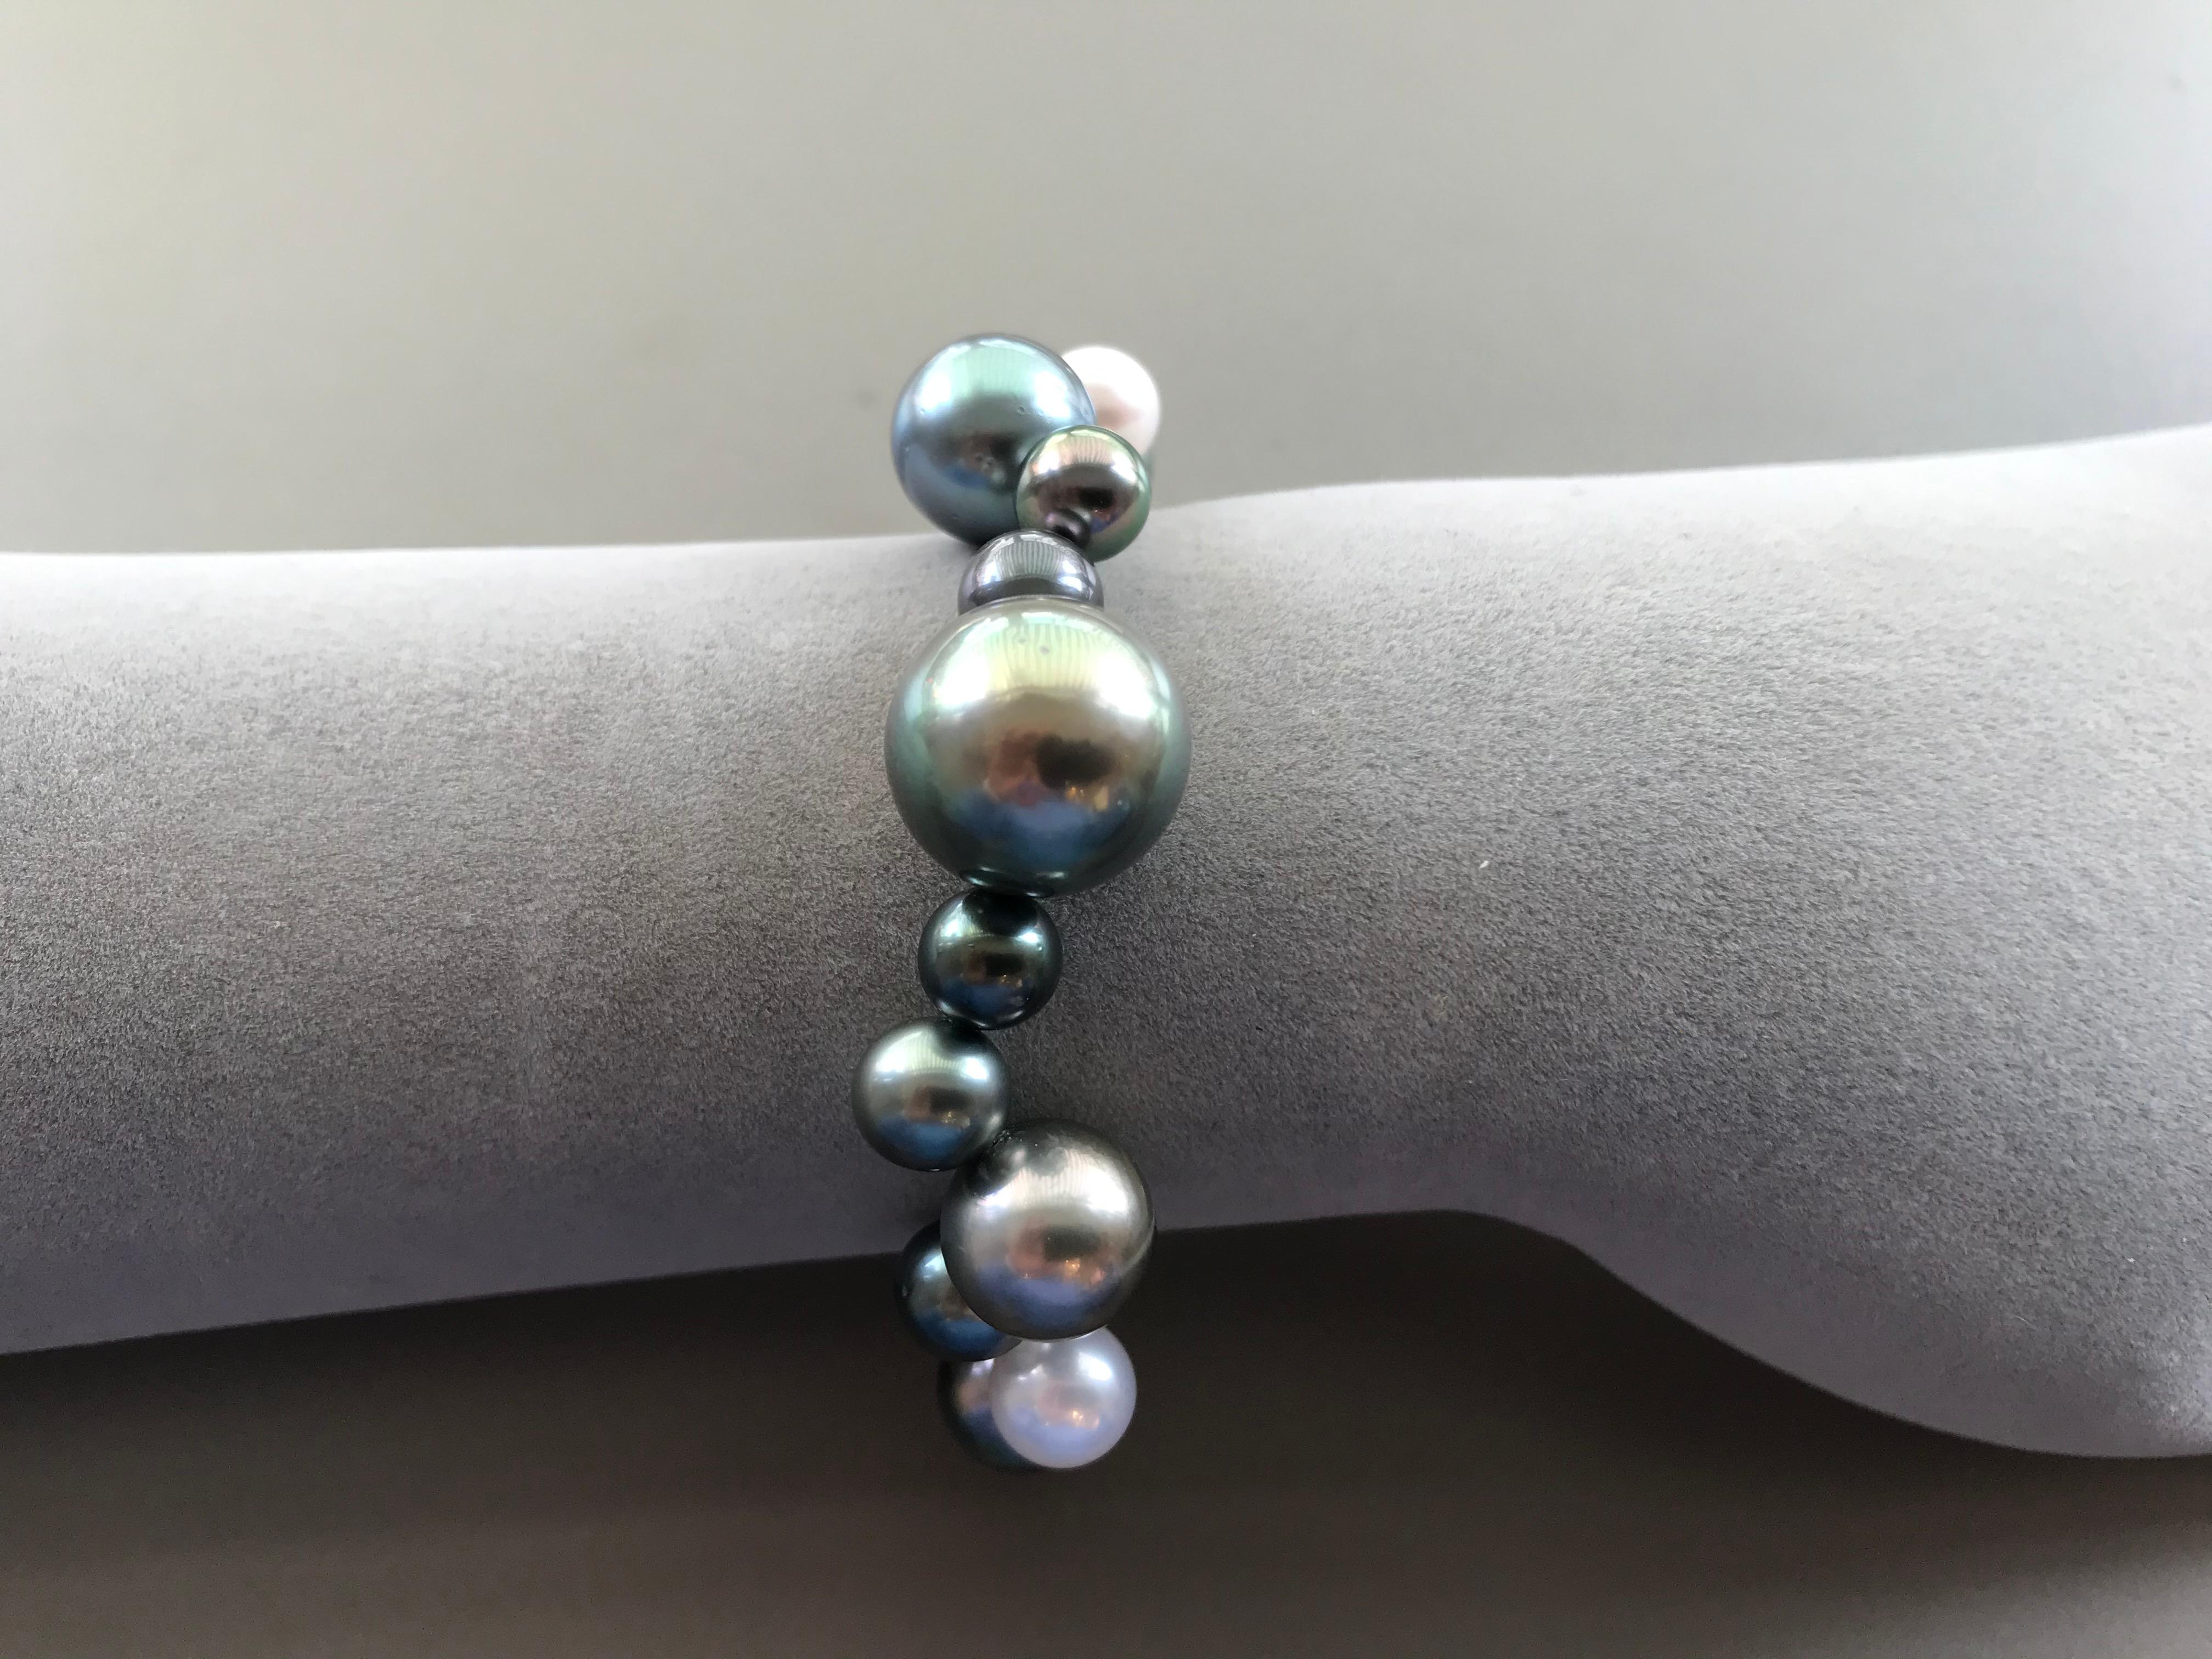 A striking bracelet with different hues, colors and sizes Tahitian and South Sea pearls.
Classic pearls with a contemporary twist.  The clasp is hidden so you see only pearls when wearing it.

Natural color Tahiti pearls not dyed.

8 - 15 mm pearls
